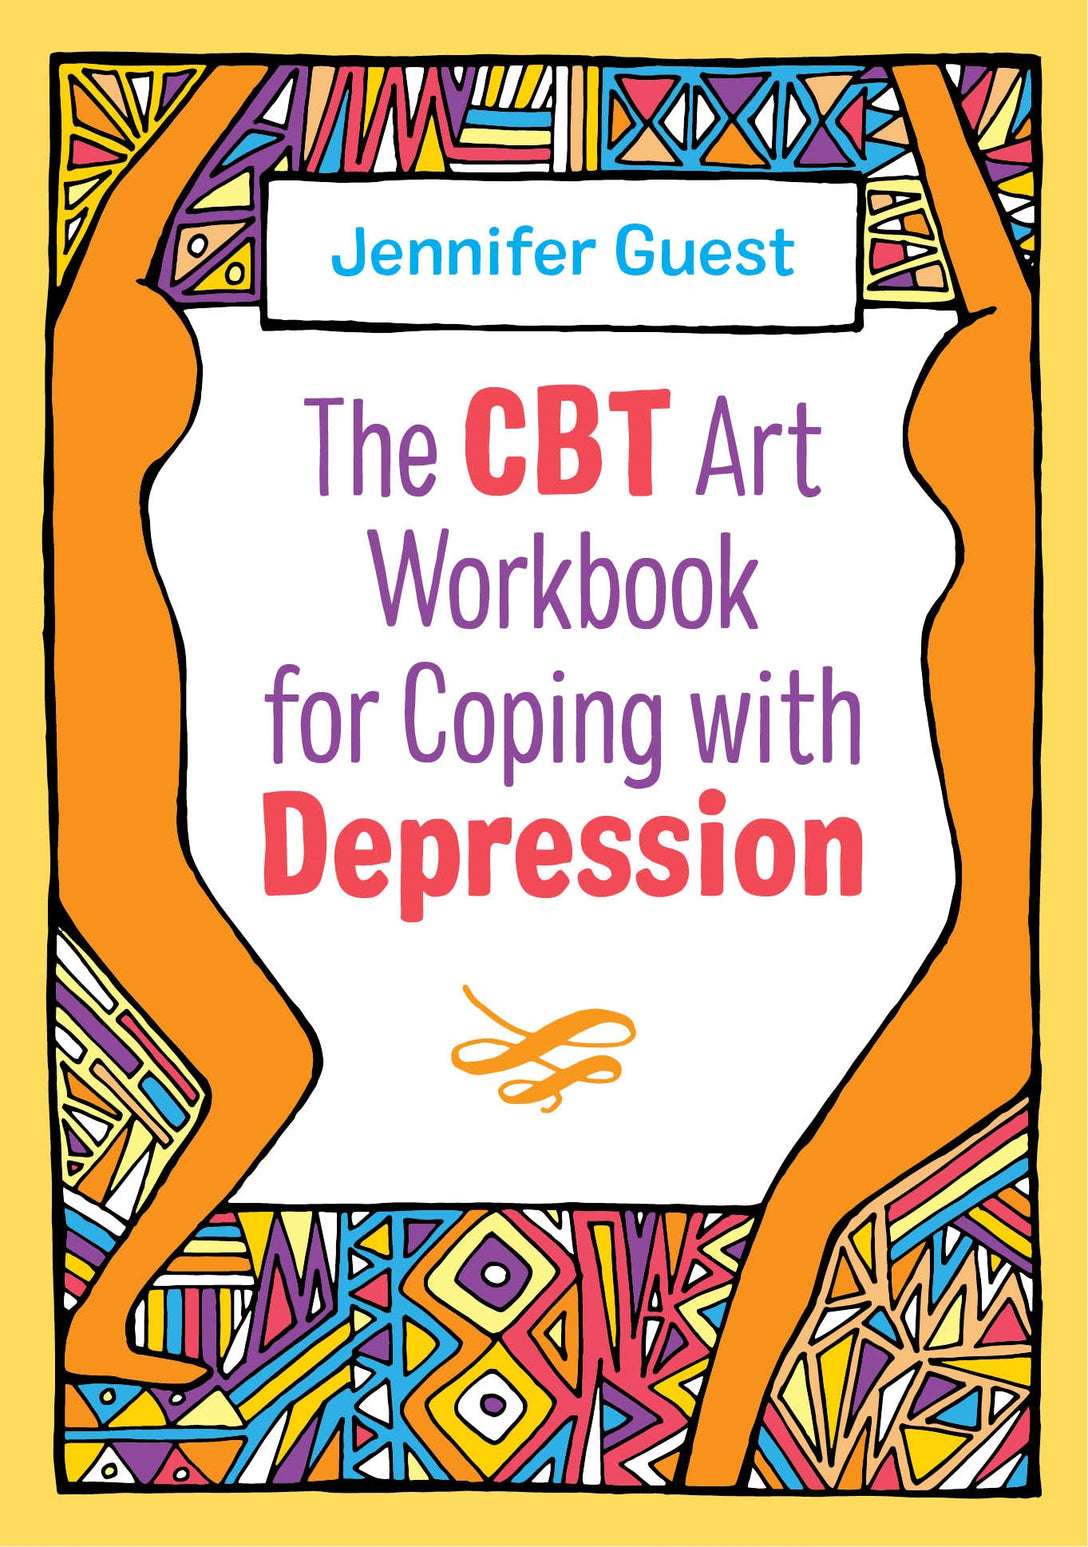 The CBT Art Workbook for Coping with Depression by Jennifer Guest